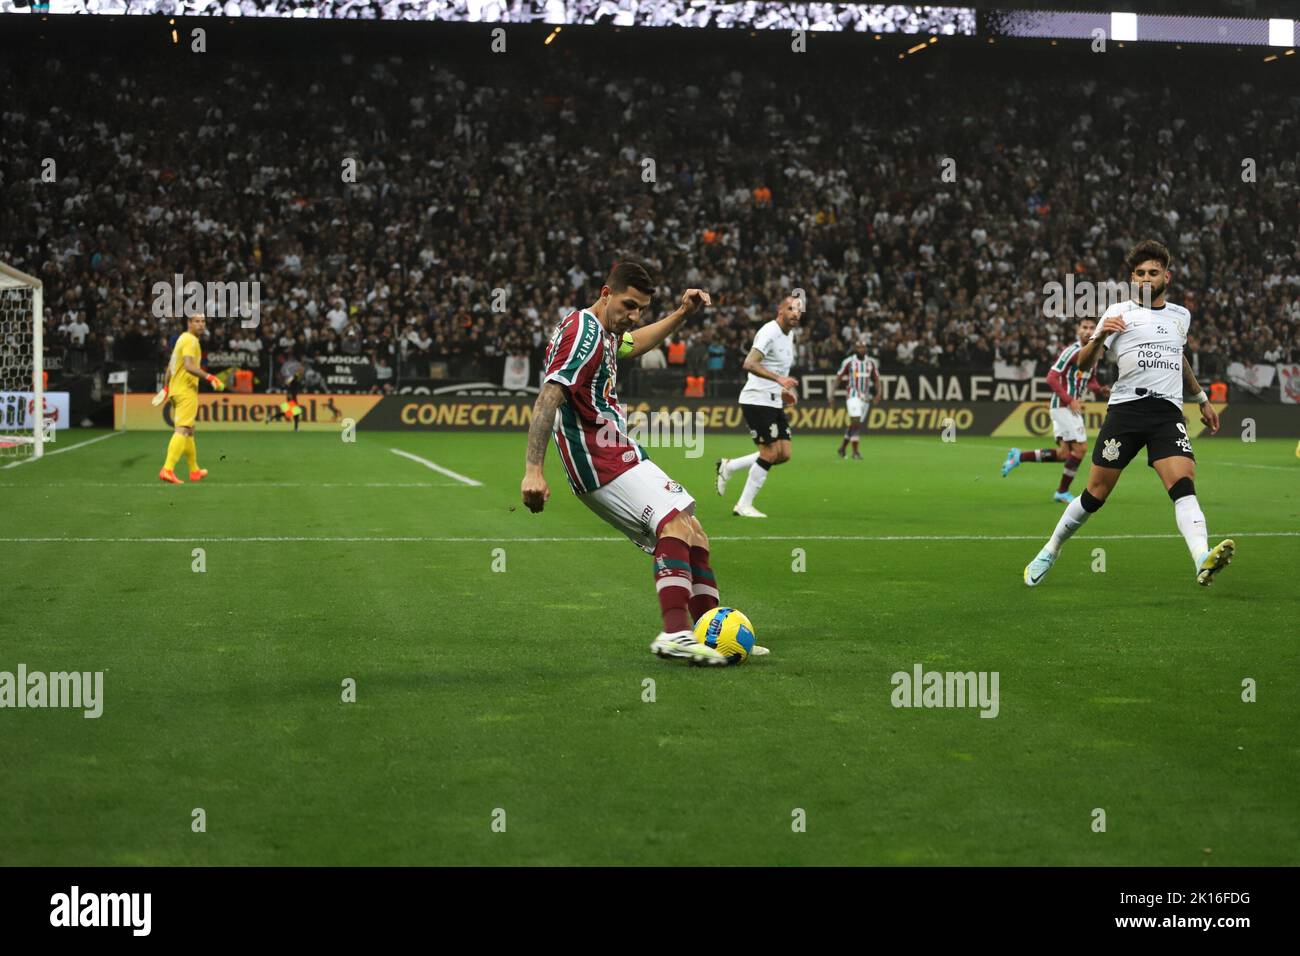 Sao Paulo, Brazil. 15th Sep, 2022. Brazil Soccer Cup - Semifinal: Corinthians vs Fluminense. September 15, 2022, Sao Paulo, Brazil: Soccer match between Corinthians and Fluminense, valid for the return clash of the Brazil Soccer Cup, held at Neo Quimica Arena, in Sao Paulo, on Thursday (15). Corinthians team won the match by the score of 3-0, with goals scored by Renato Augusto, Giuliano and Felipe Melo (against). With the result, Corinthians advanced to the final of the competition. Credit: ZUMA Press, Inc./Alamy Live News Stock Photo